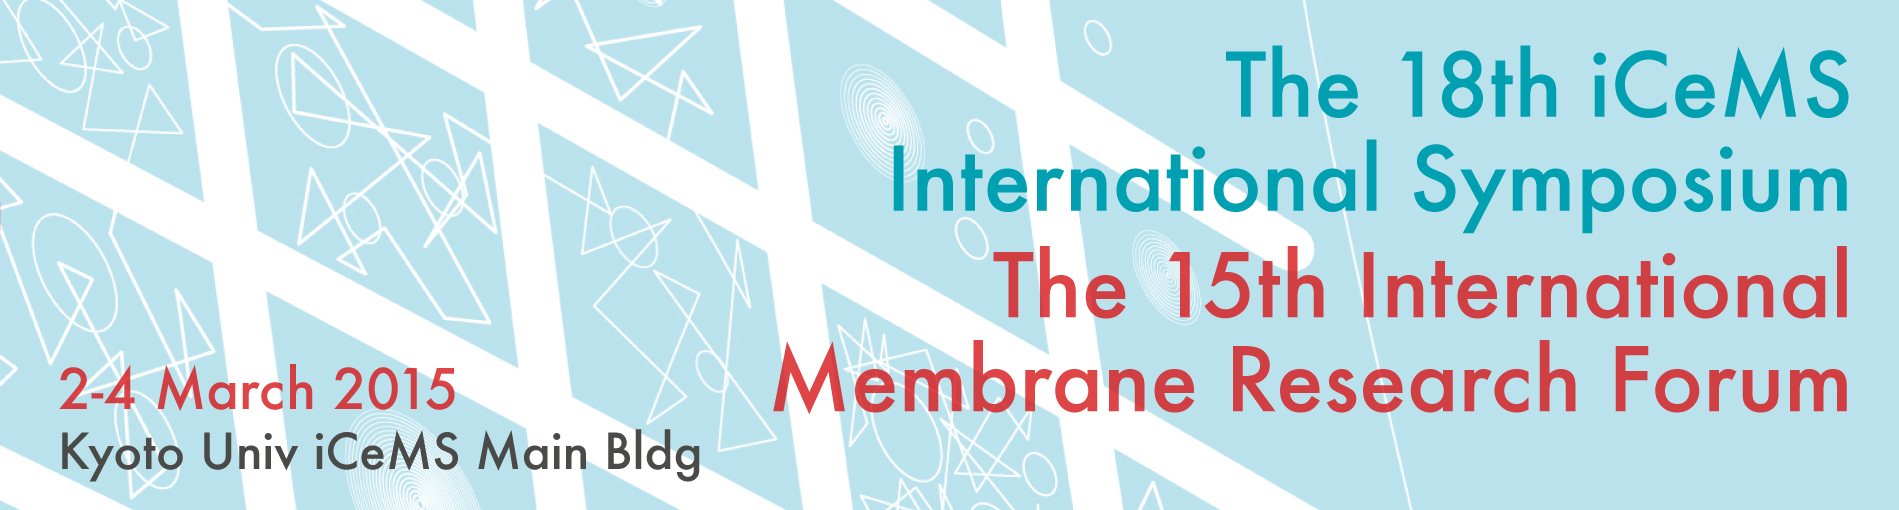 The 18th iCeMS International Symposium: The 15th International Membrane Research Forum